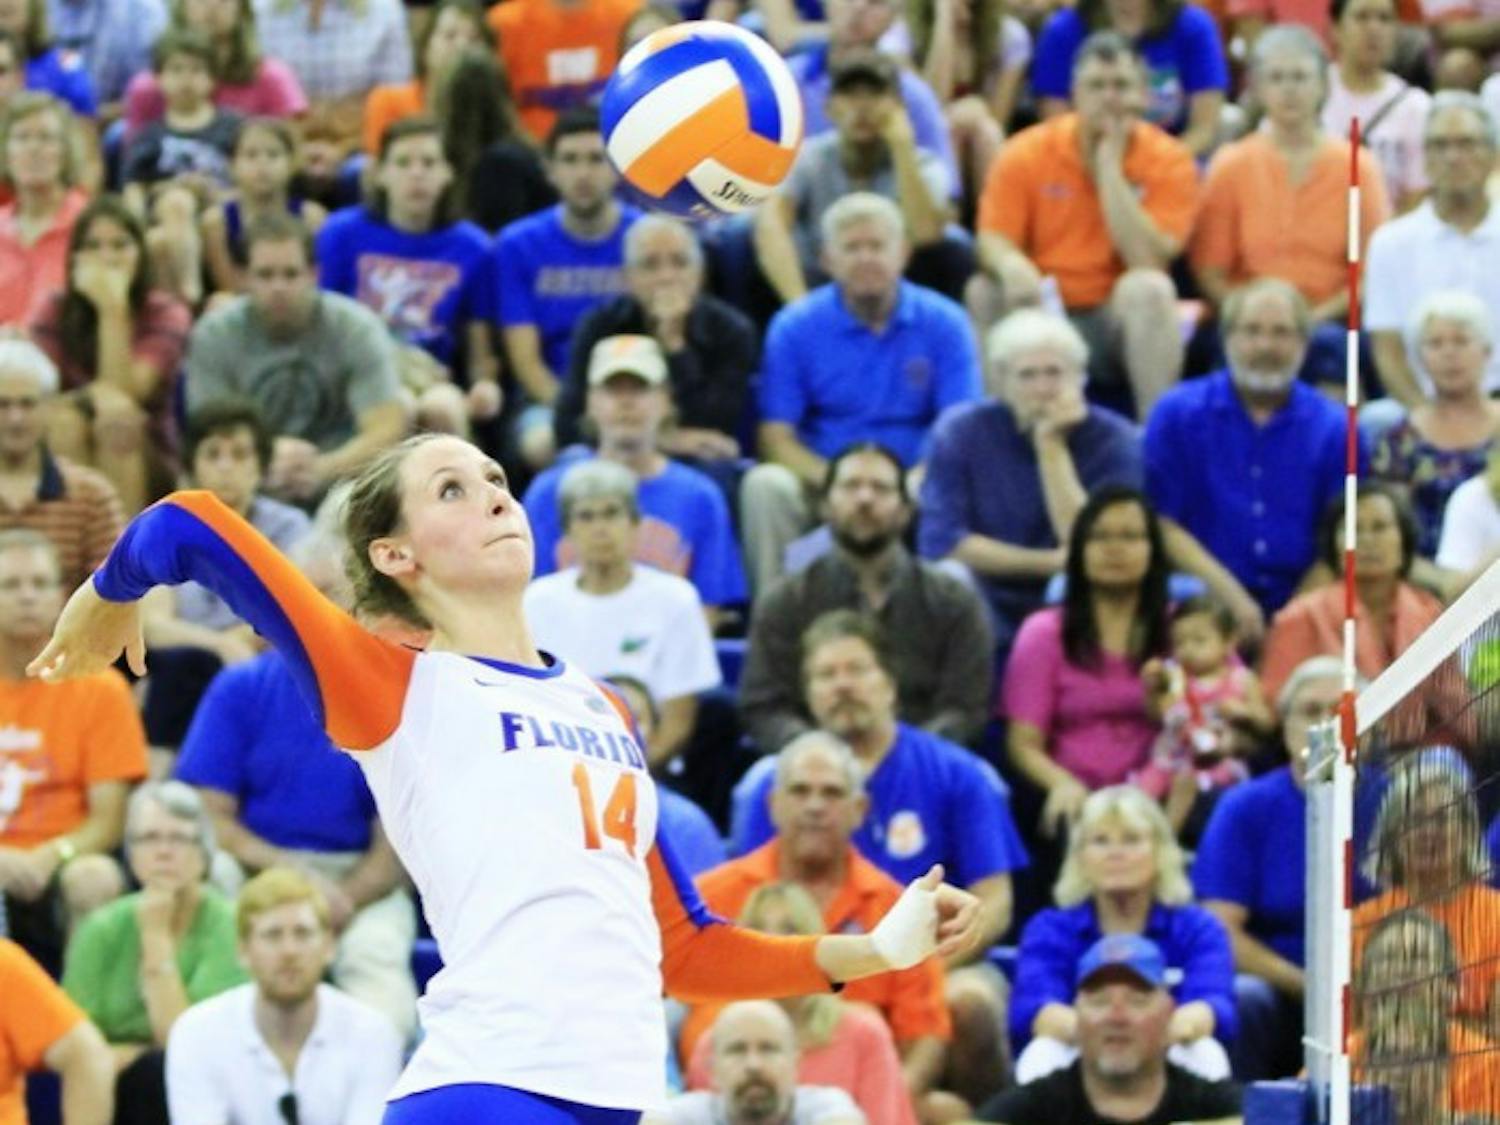 Senior middle blocker Betsy Smith attempts to spike the ball over the net during Florida's 3-0 victory against Missouri on Sept. 21 at the O'Connell Center. Her leadership has helped the young Gators communicate on the court.